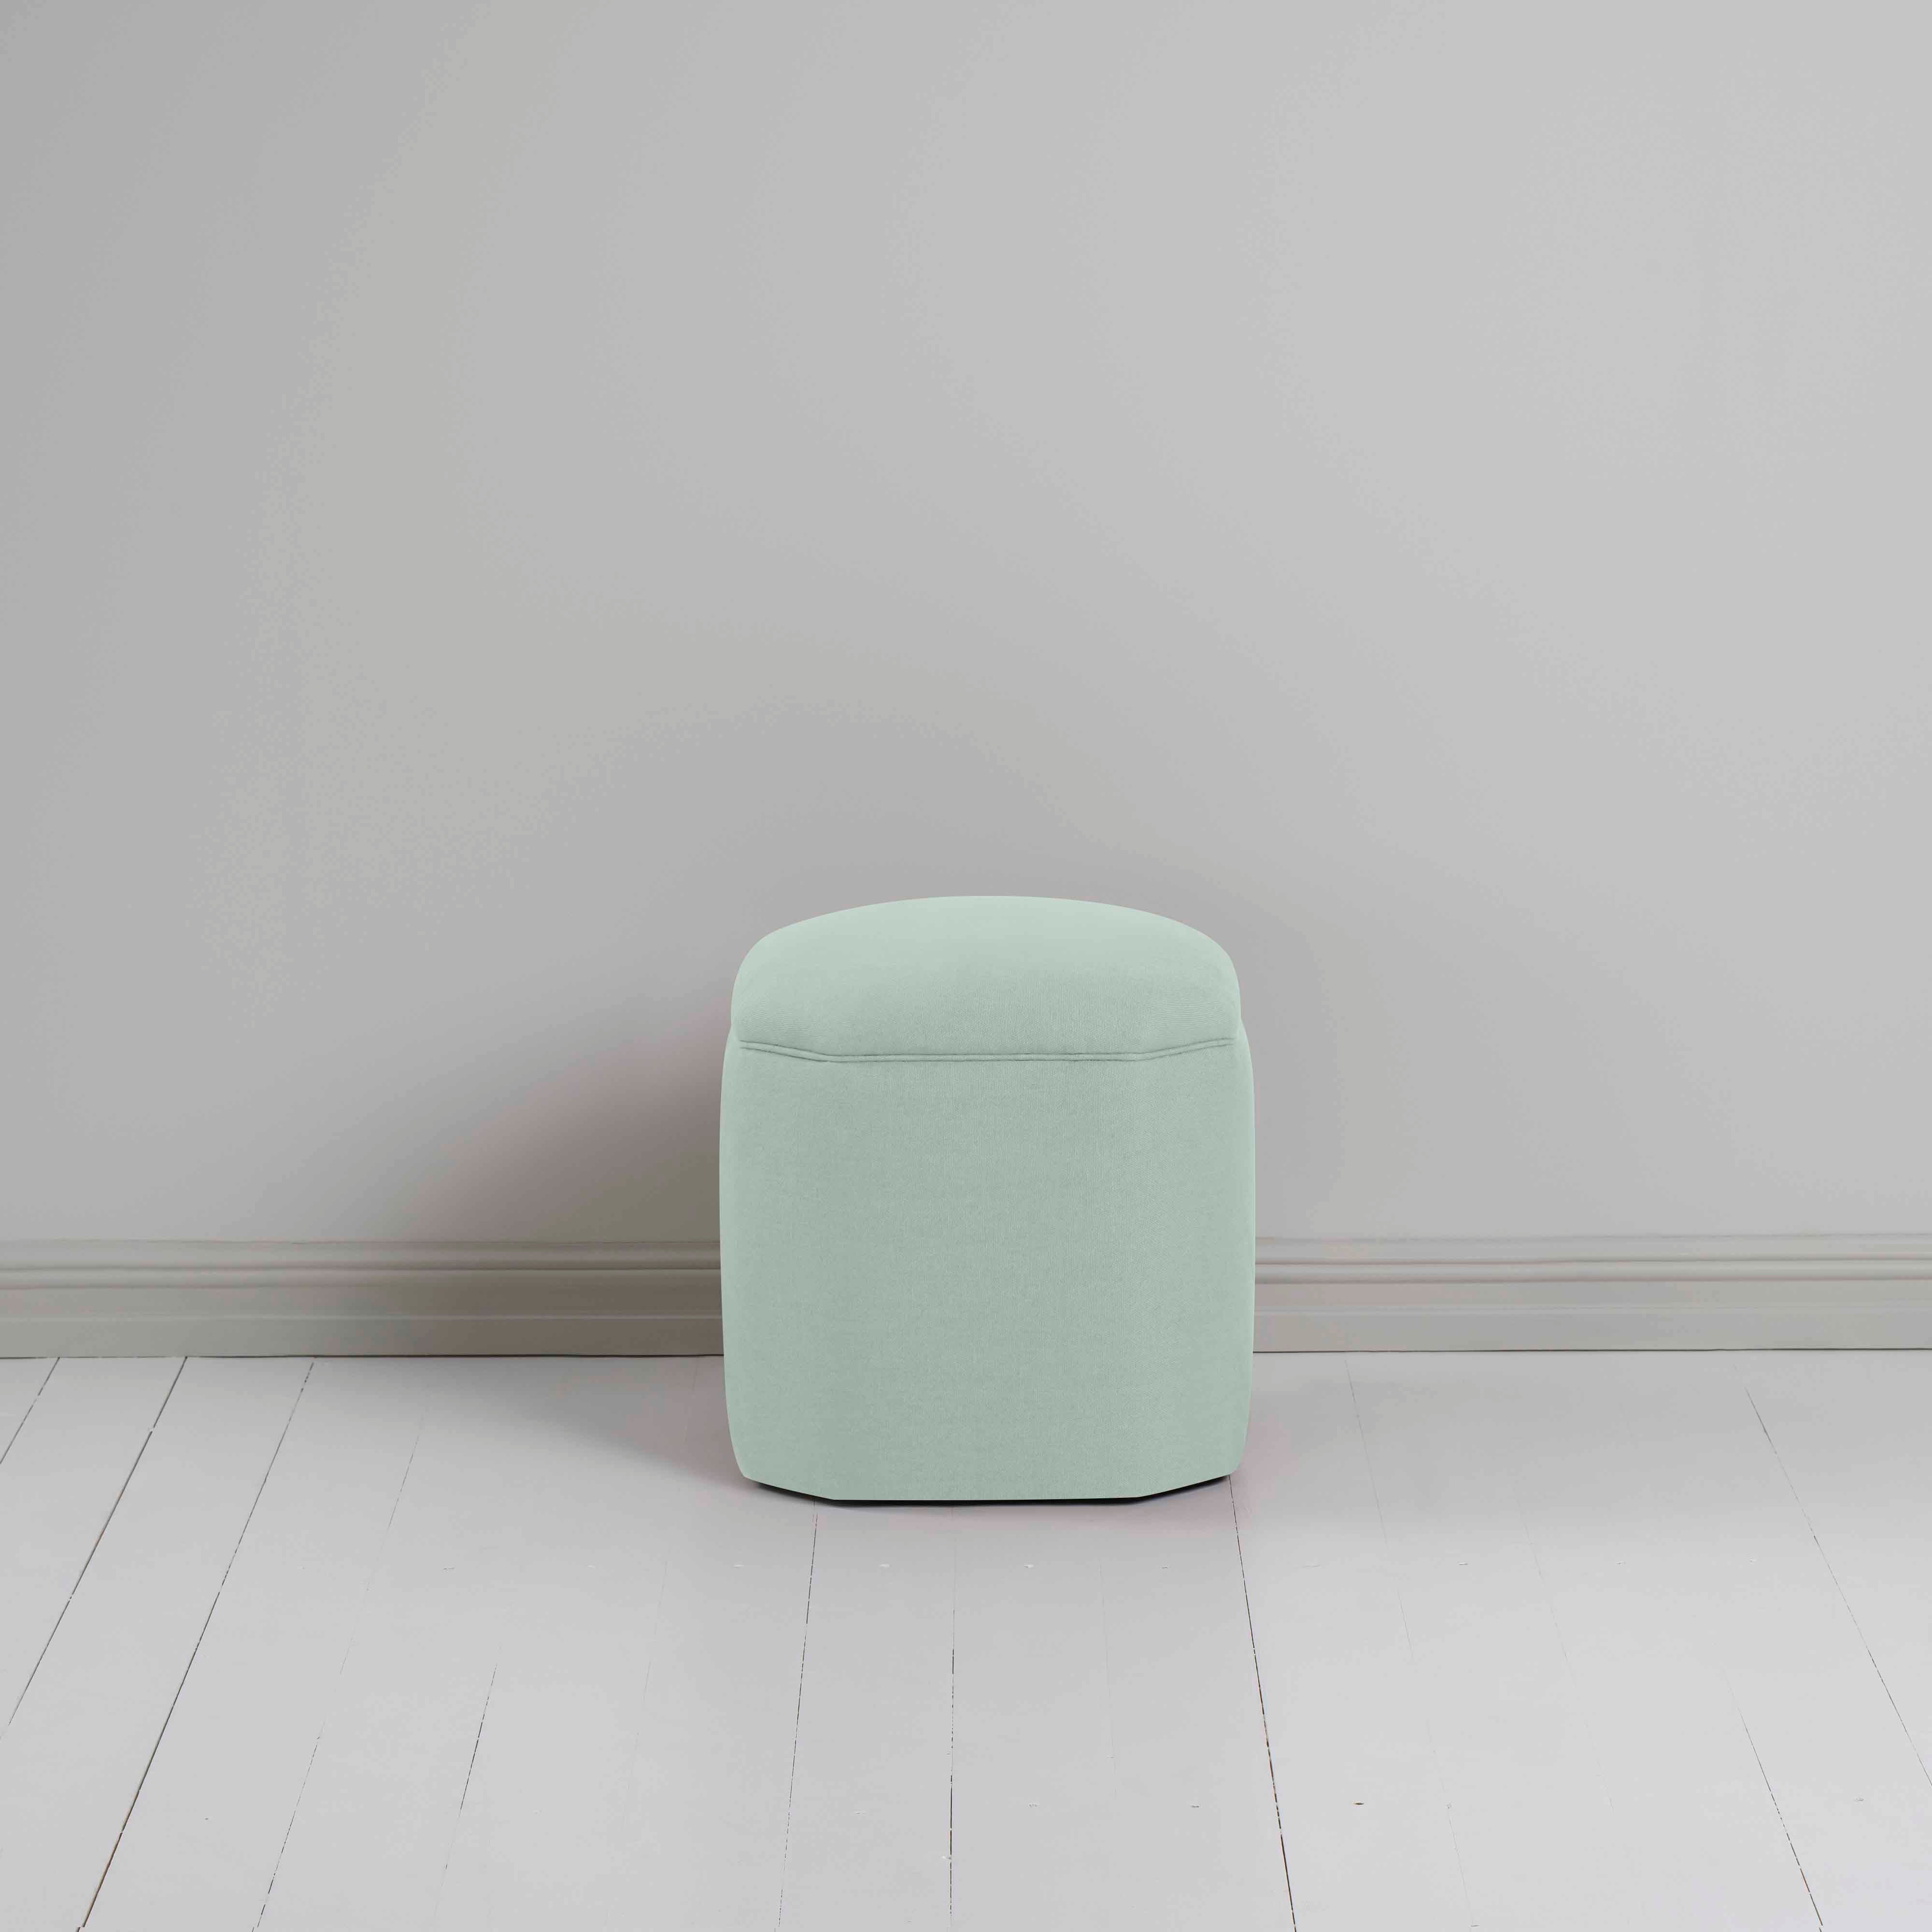  Thither Hexagonal Ottoman in Laidback Linen Sky 